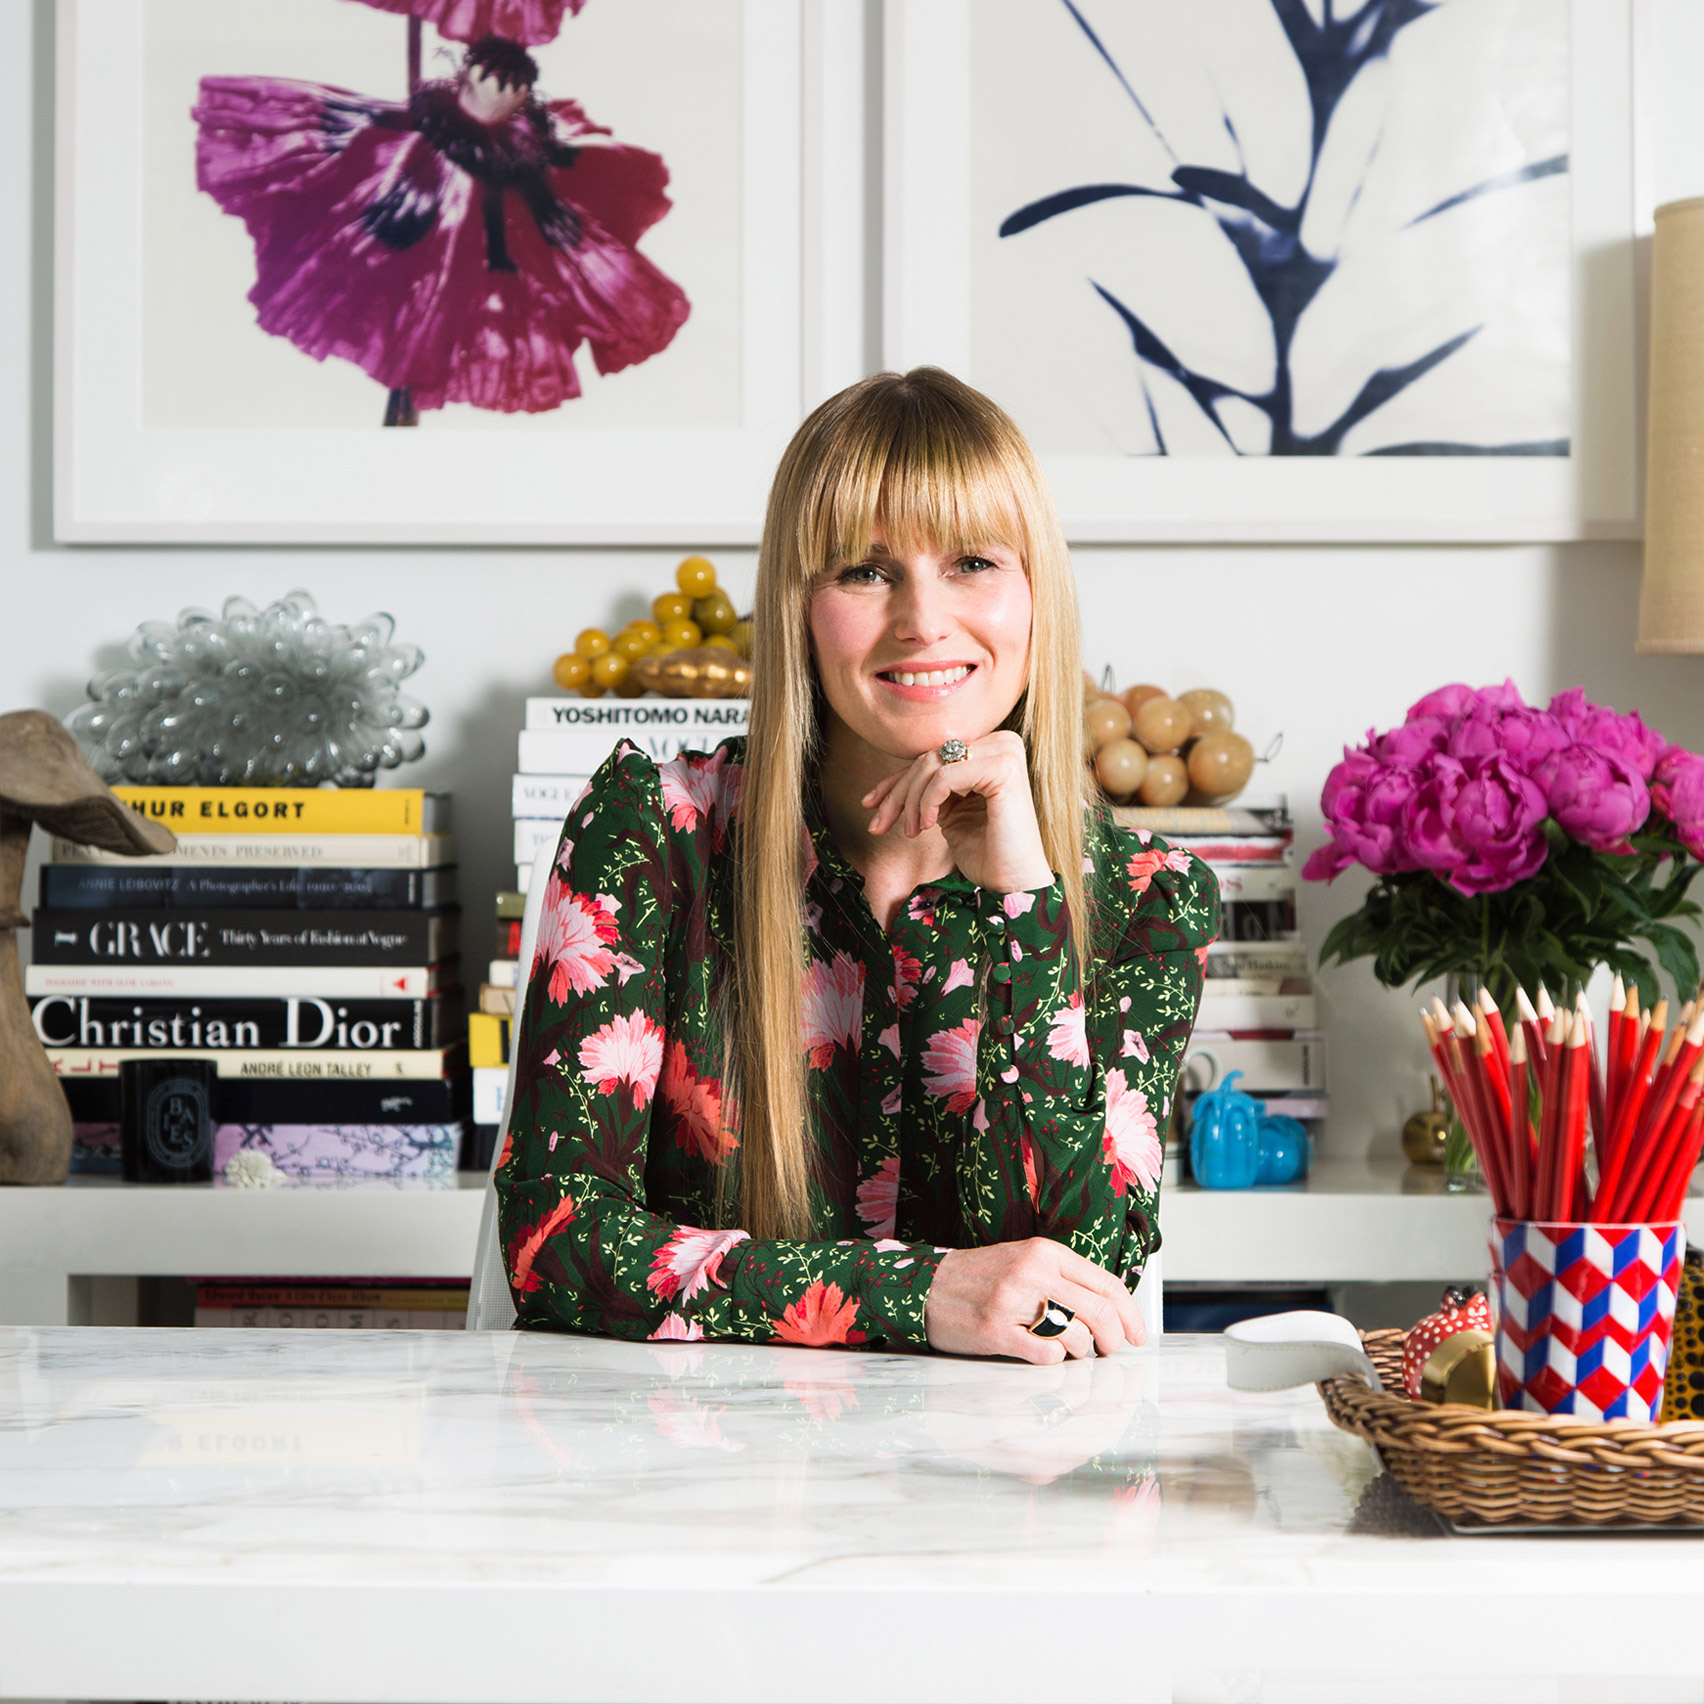 Architectural Digest editor-in-chief Amy Astley